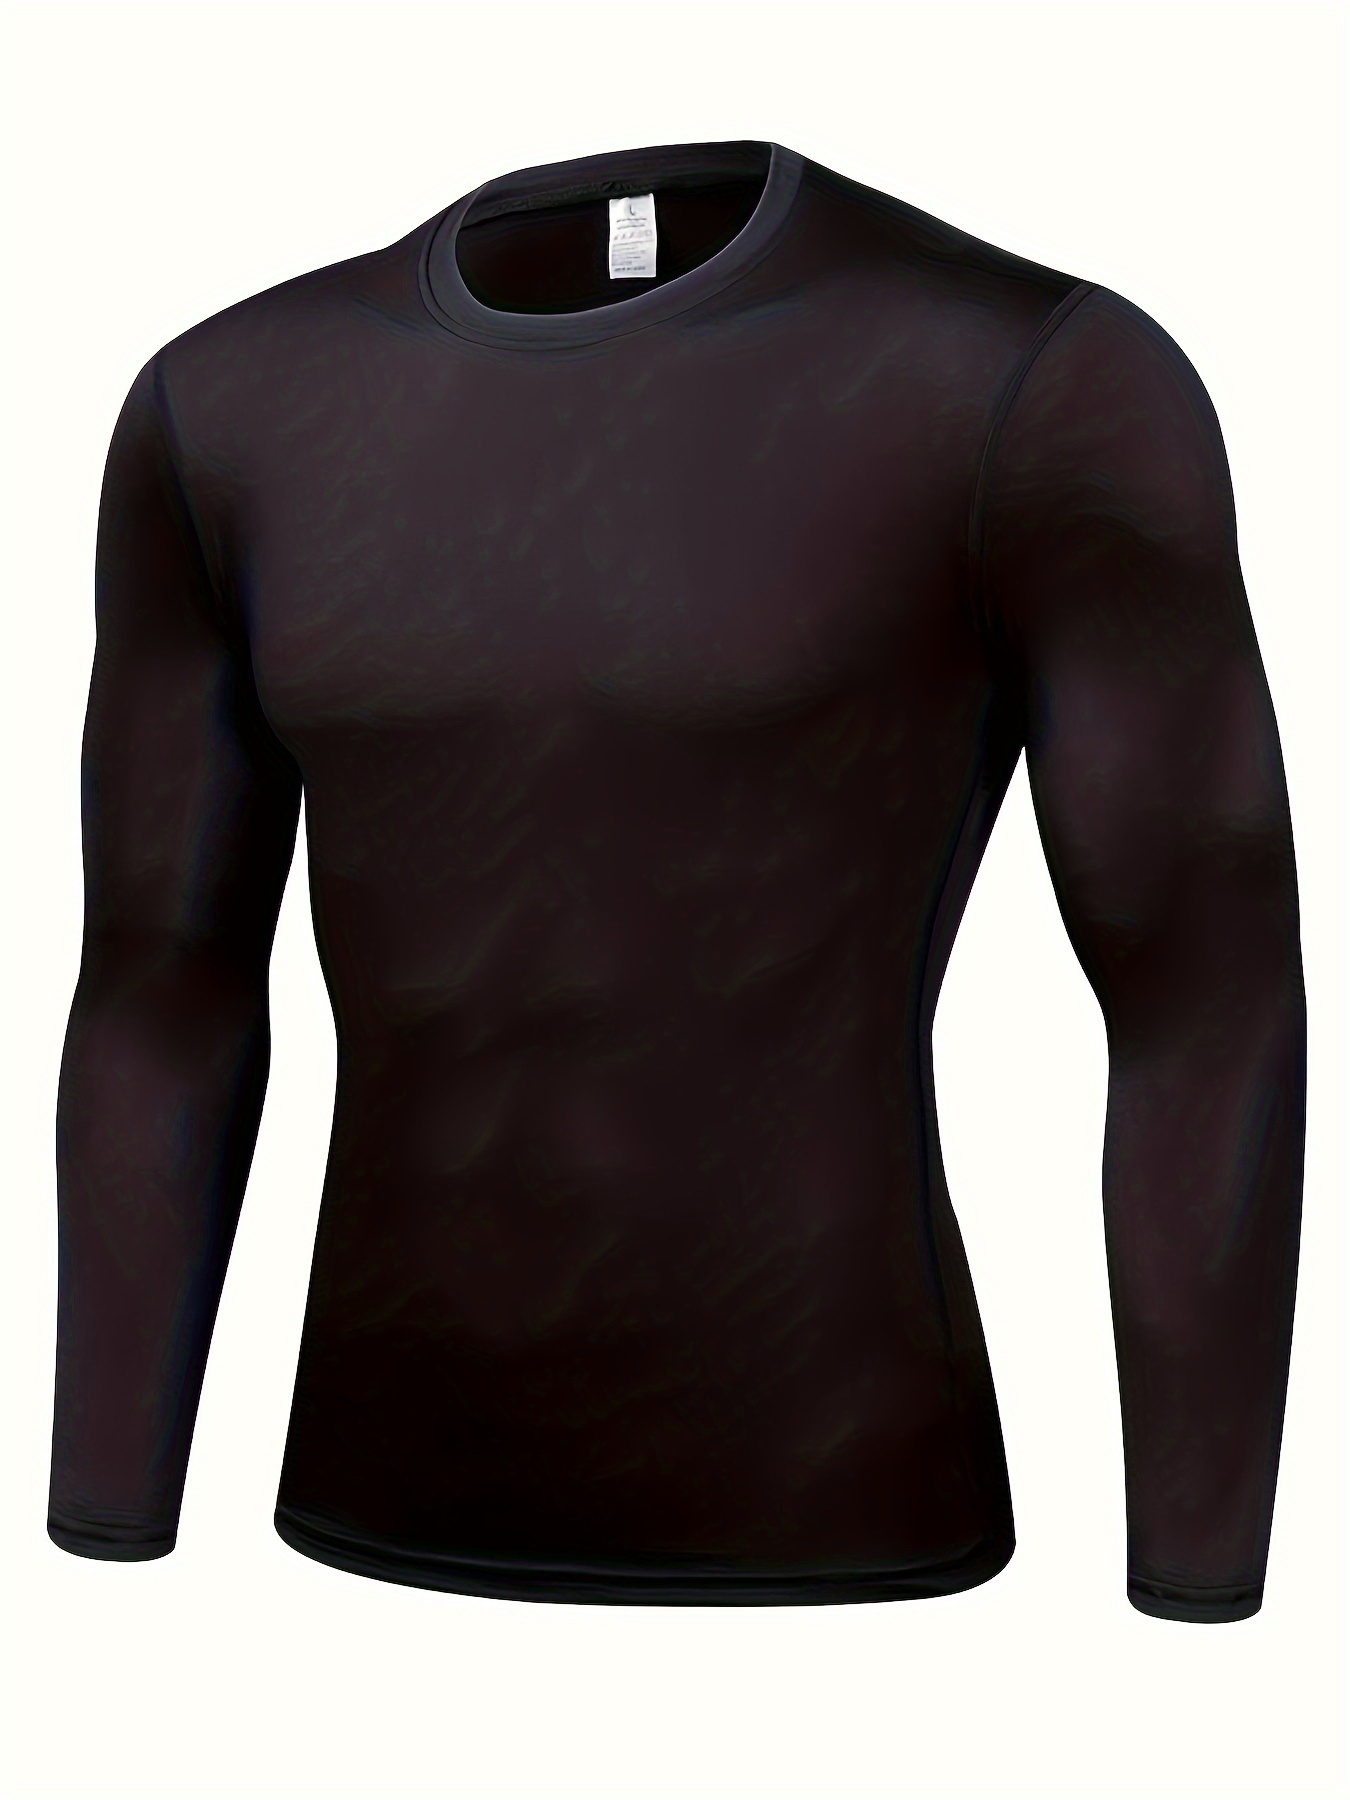 Basketball Compression Shirts - DME-Direct